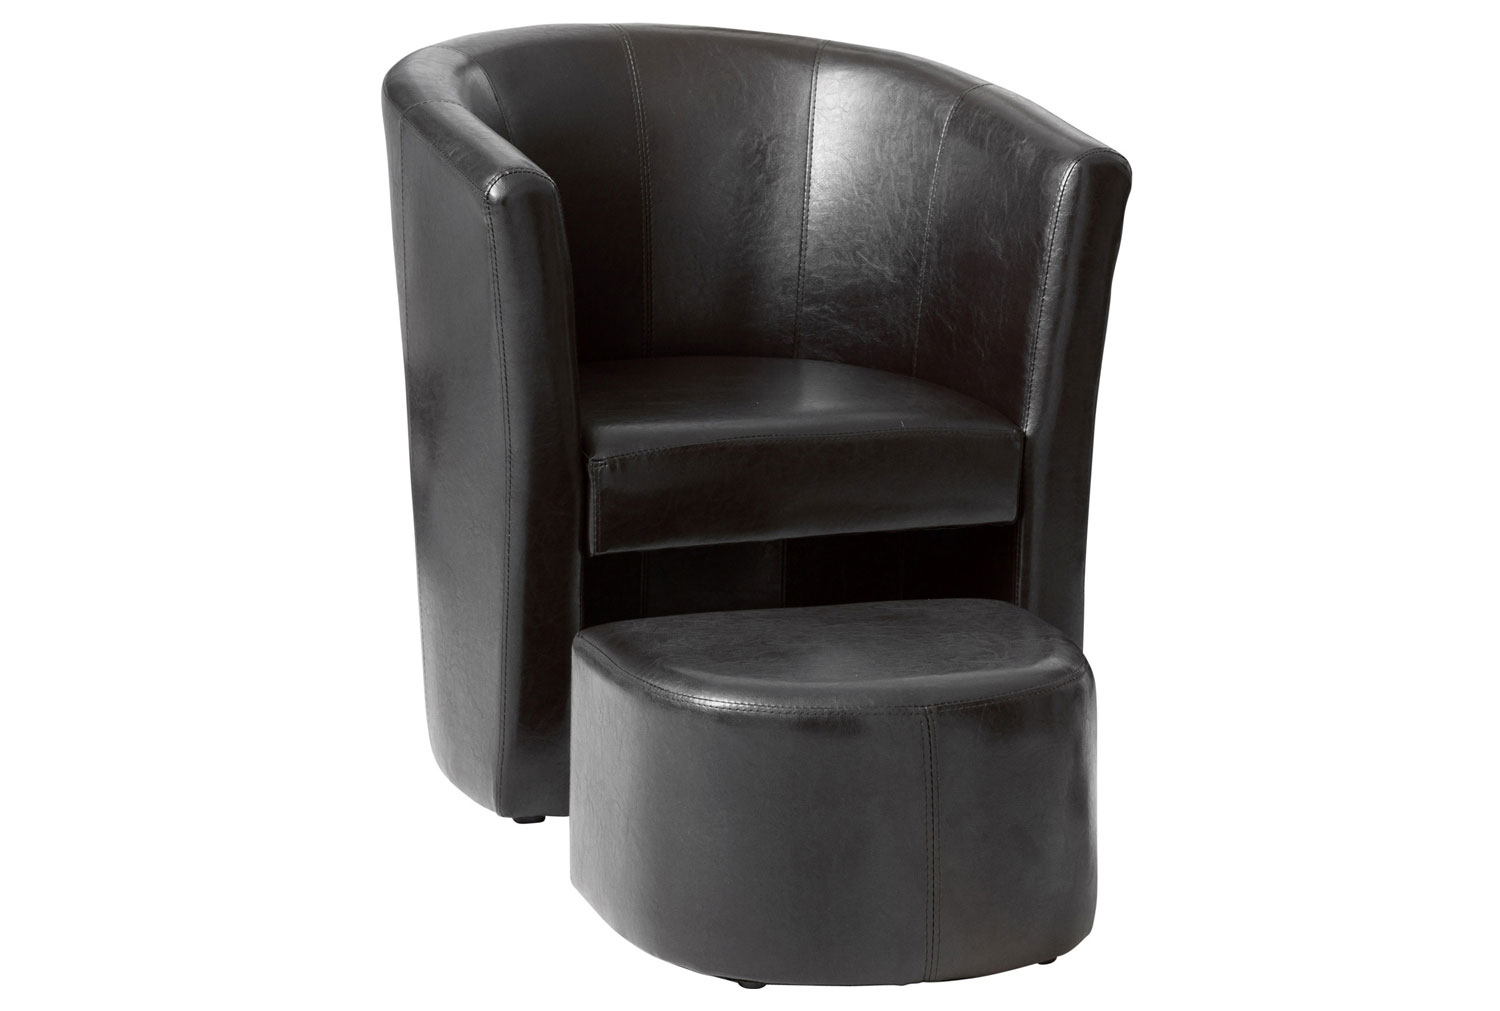 Sinclair Tub Chair With Footstool, Black